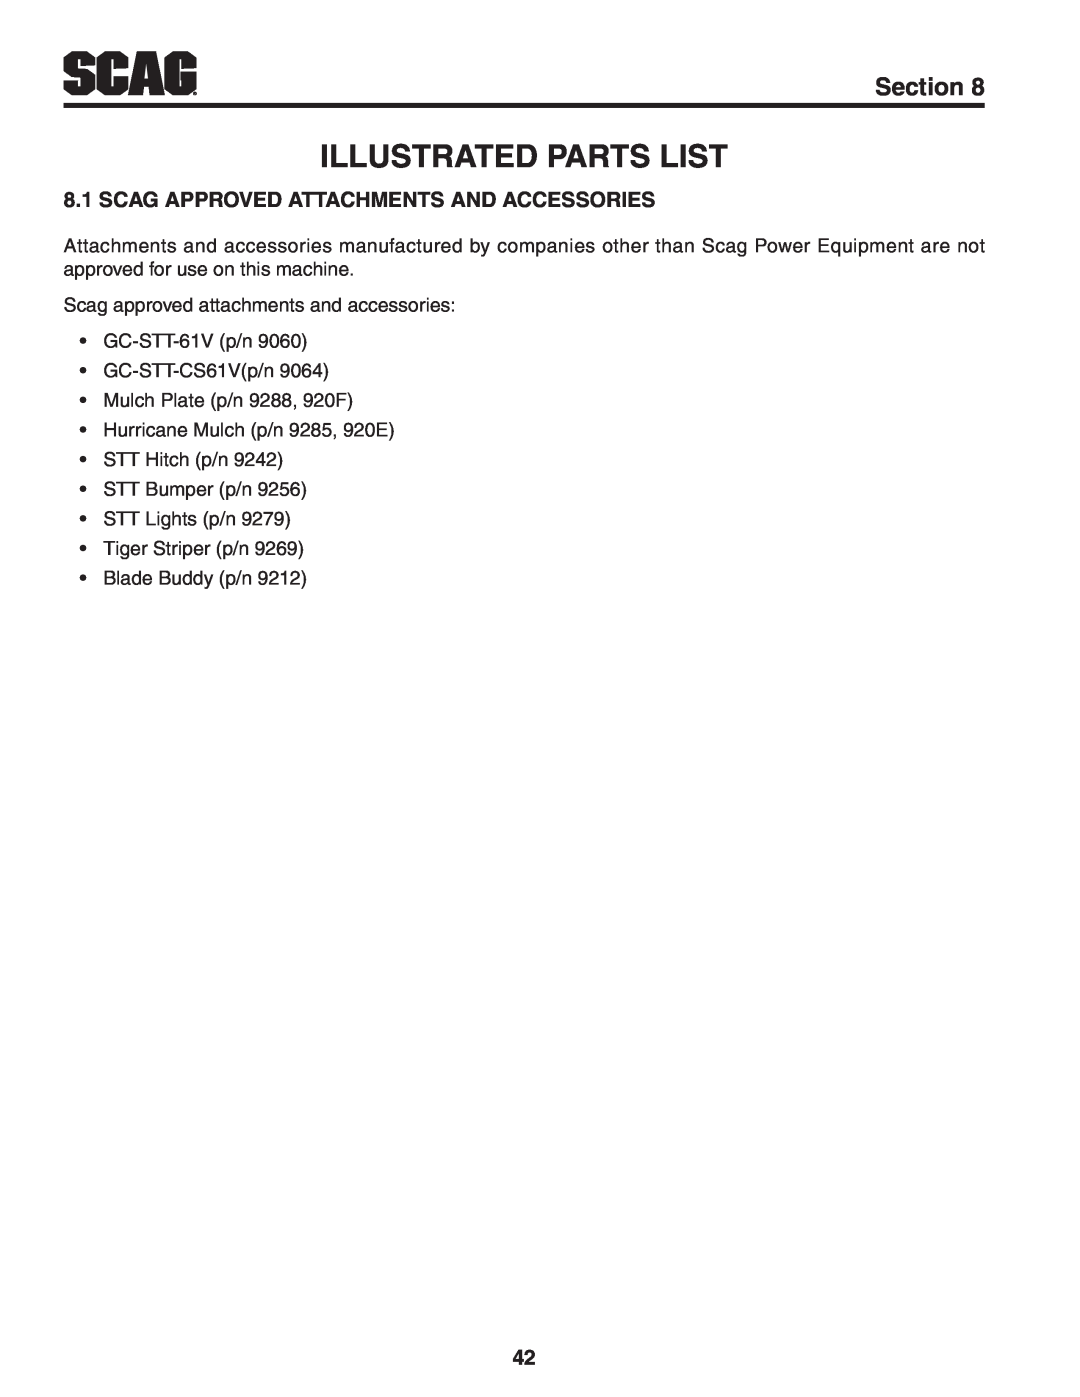 Scag Power Equipment STT-31EFI-SS Illustrated Parts List, Scag Approved Attachments And Accessories, Section 